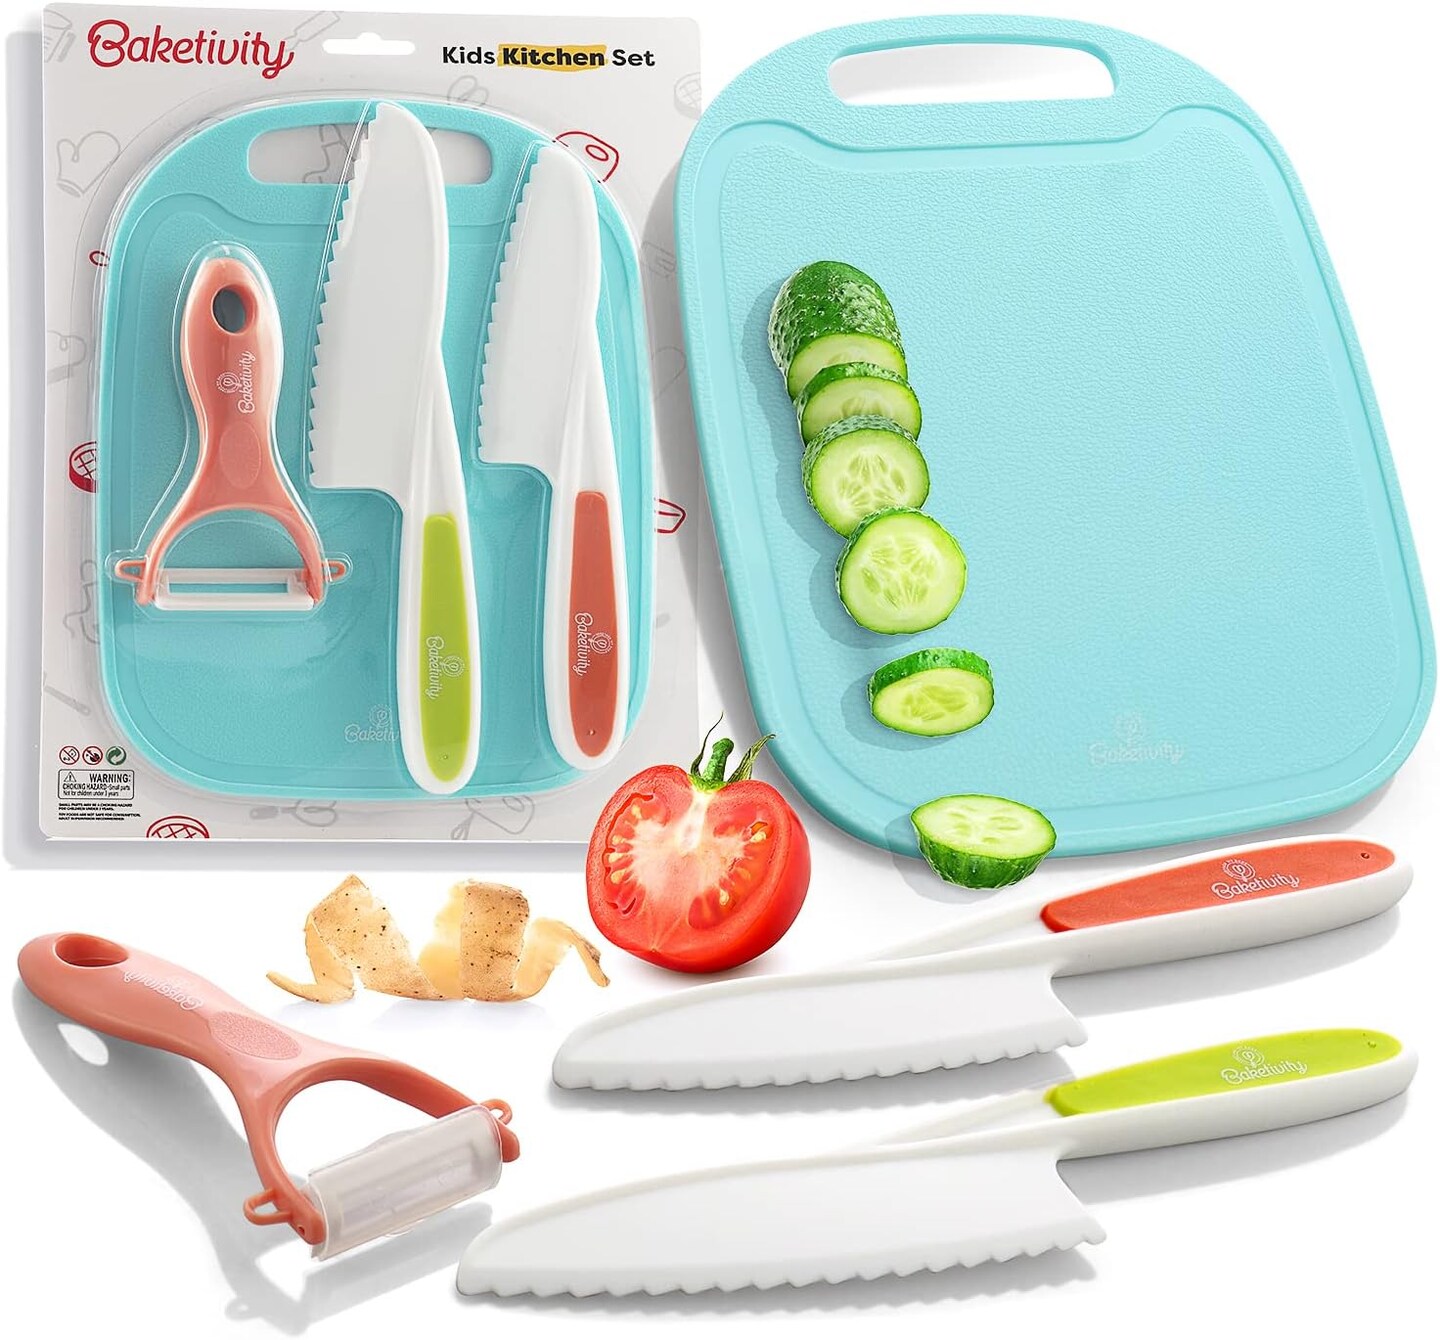 Baketivity Kid Safe Plastic Knives For Real Cooking With Cutting Board, Peeler For Kitchen - Knife Set With Blunt Tip, Dishwasher Safe, BPA Free Kids Knives For Cutting